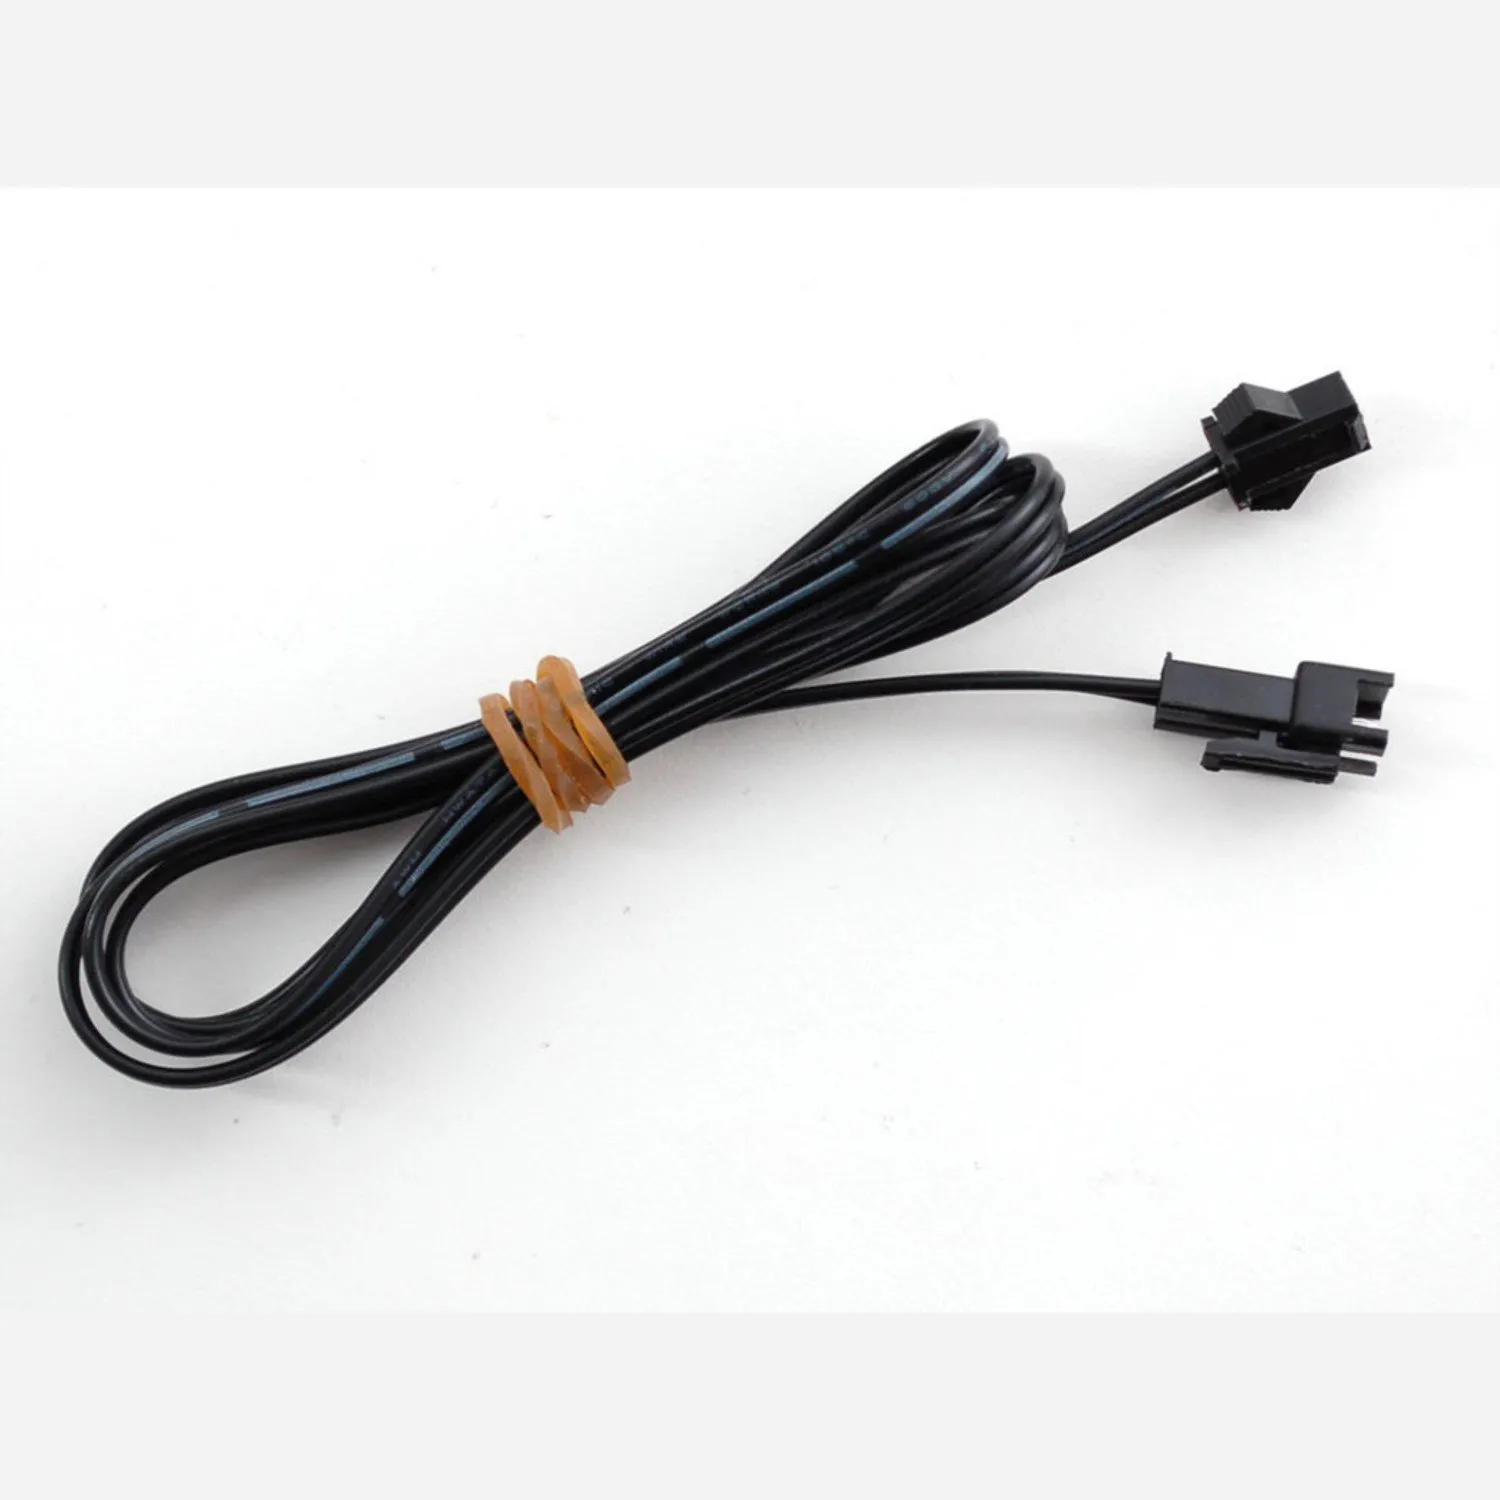 Photo of In-line power cable 1 meter long extension cord (for EL wire)